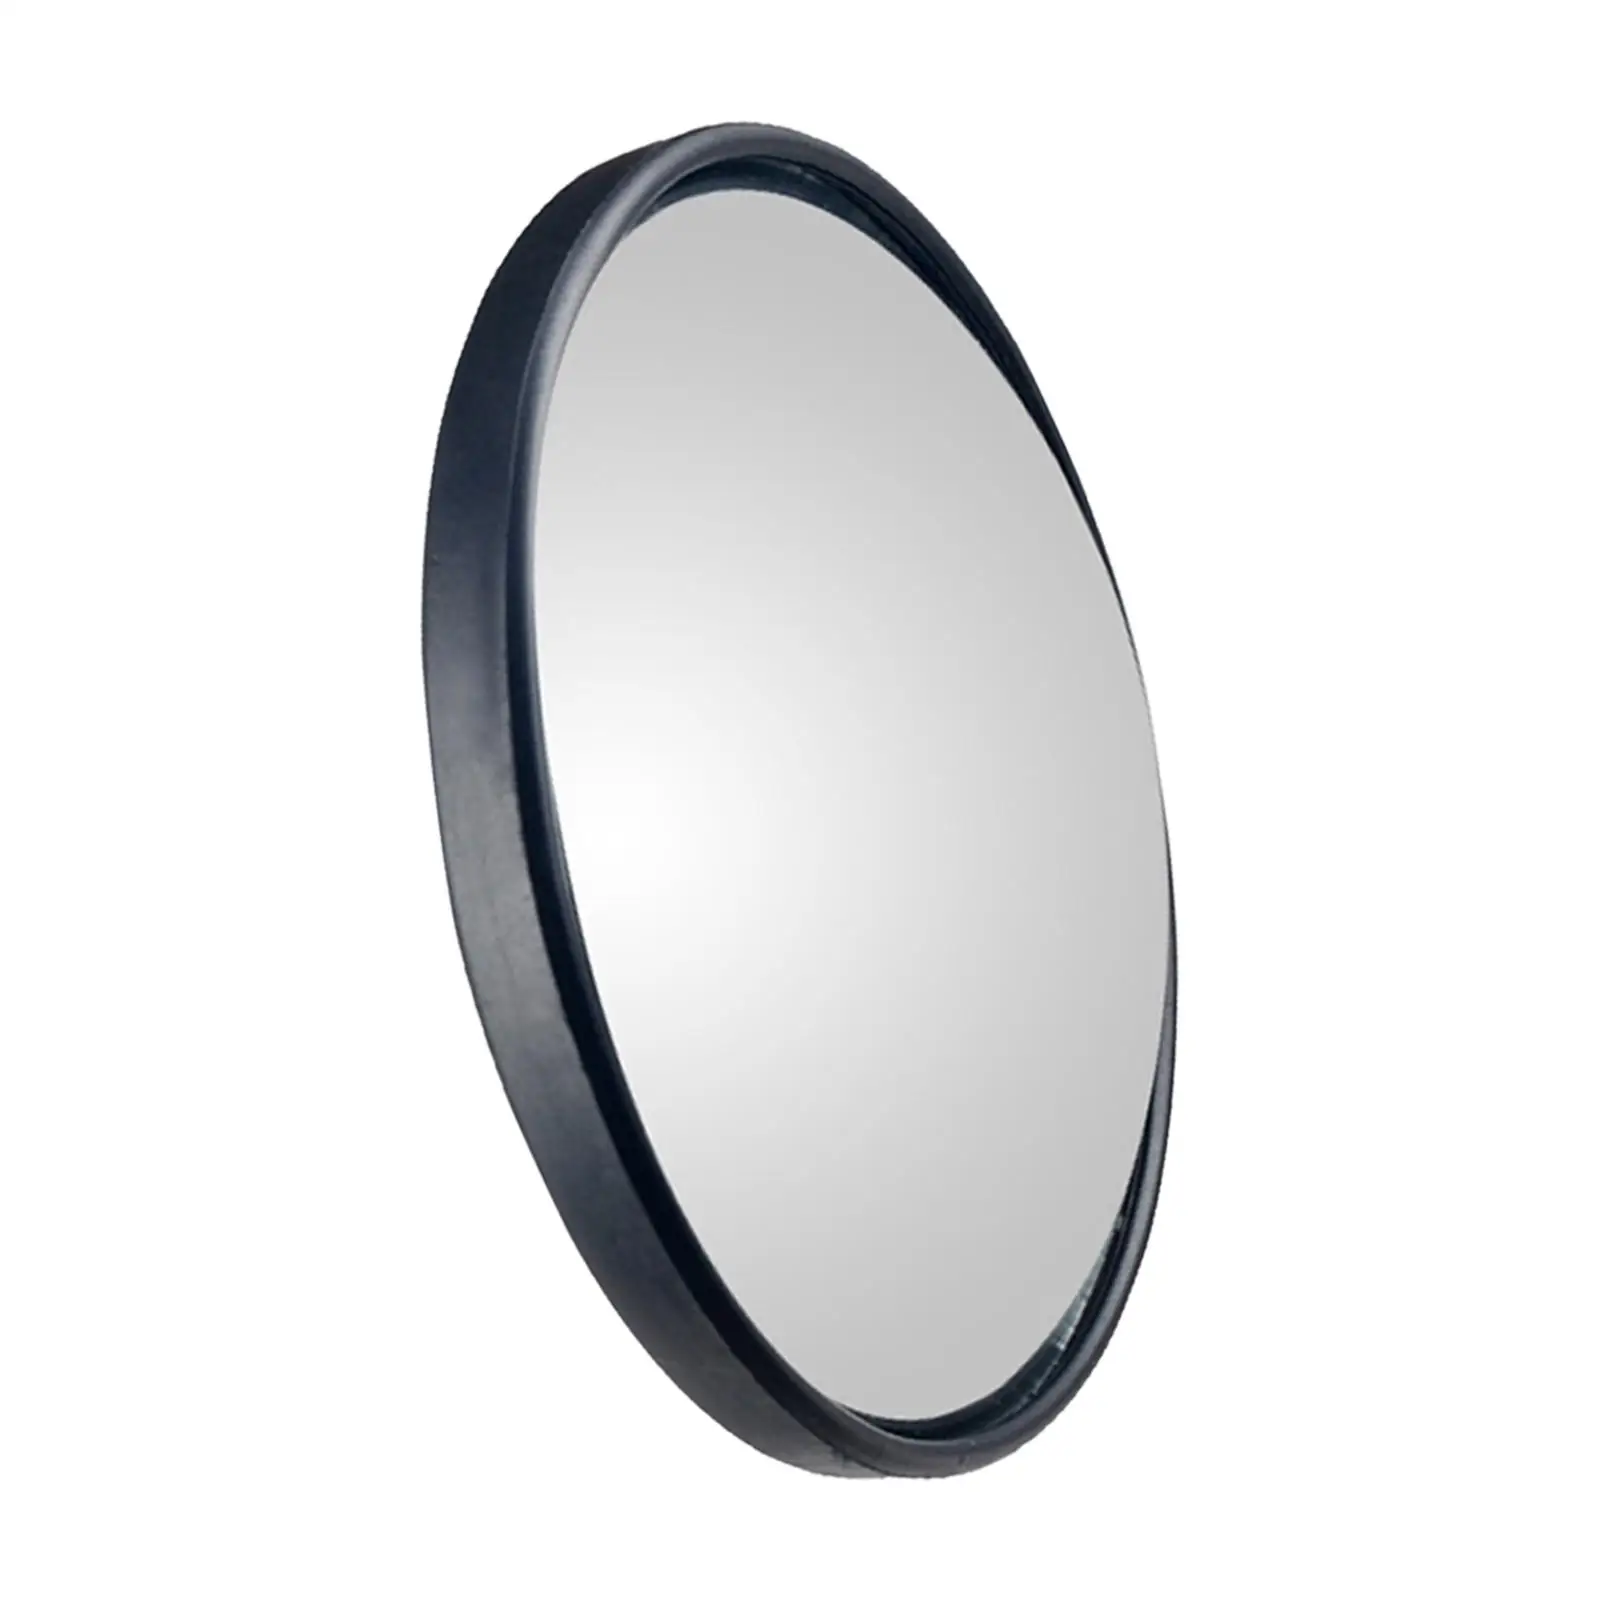 Adjustable Side Convex Mirror Replace Wide Angle Rearview for Truck